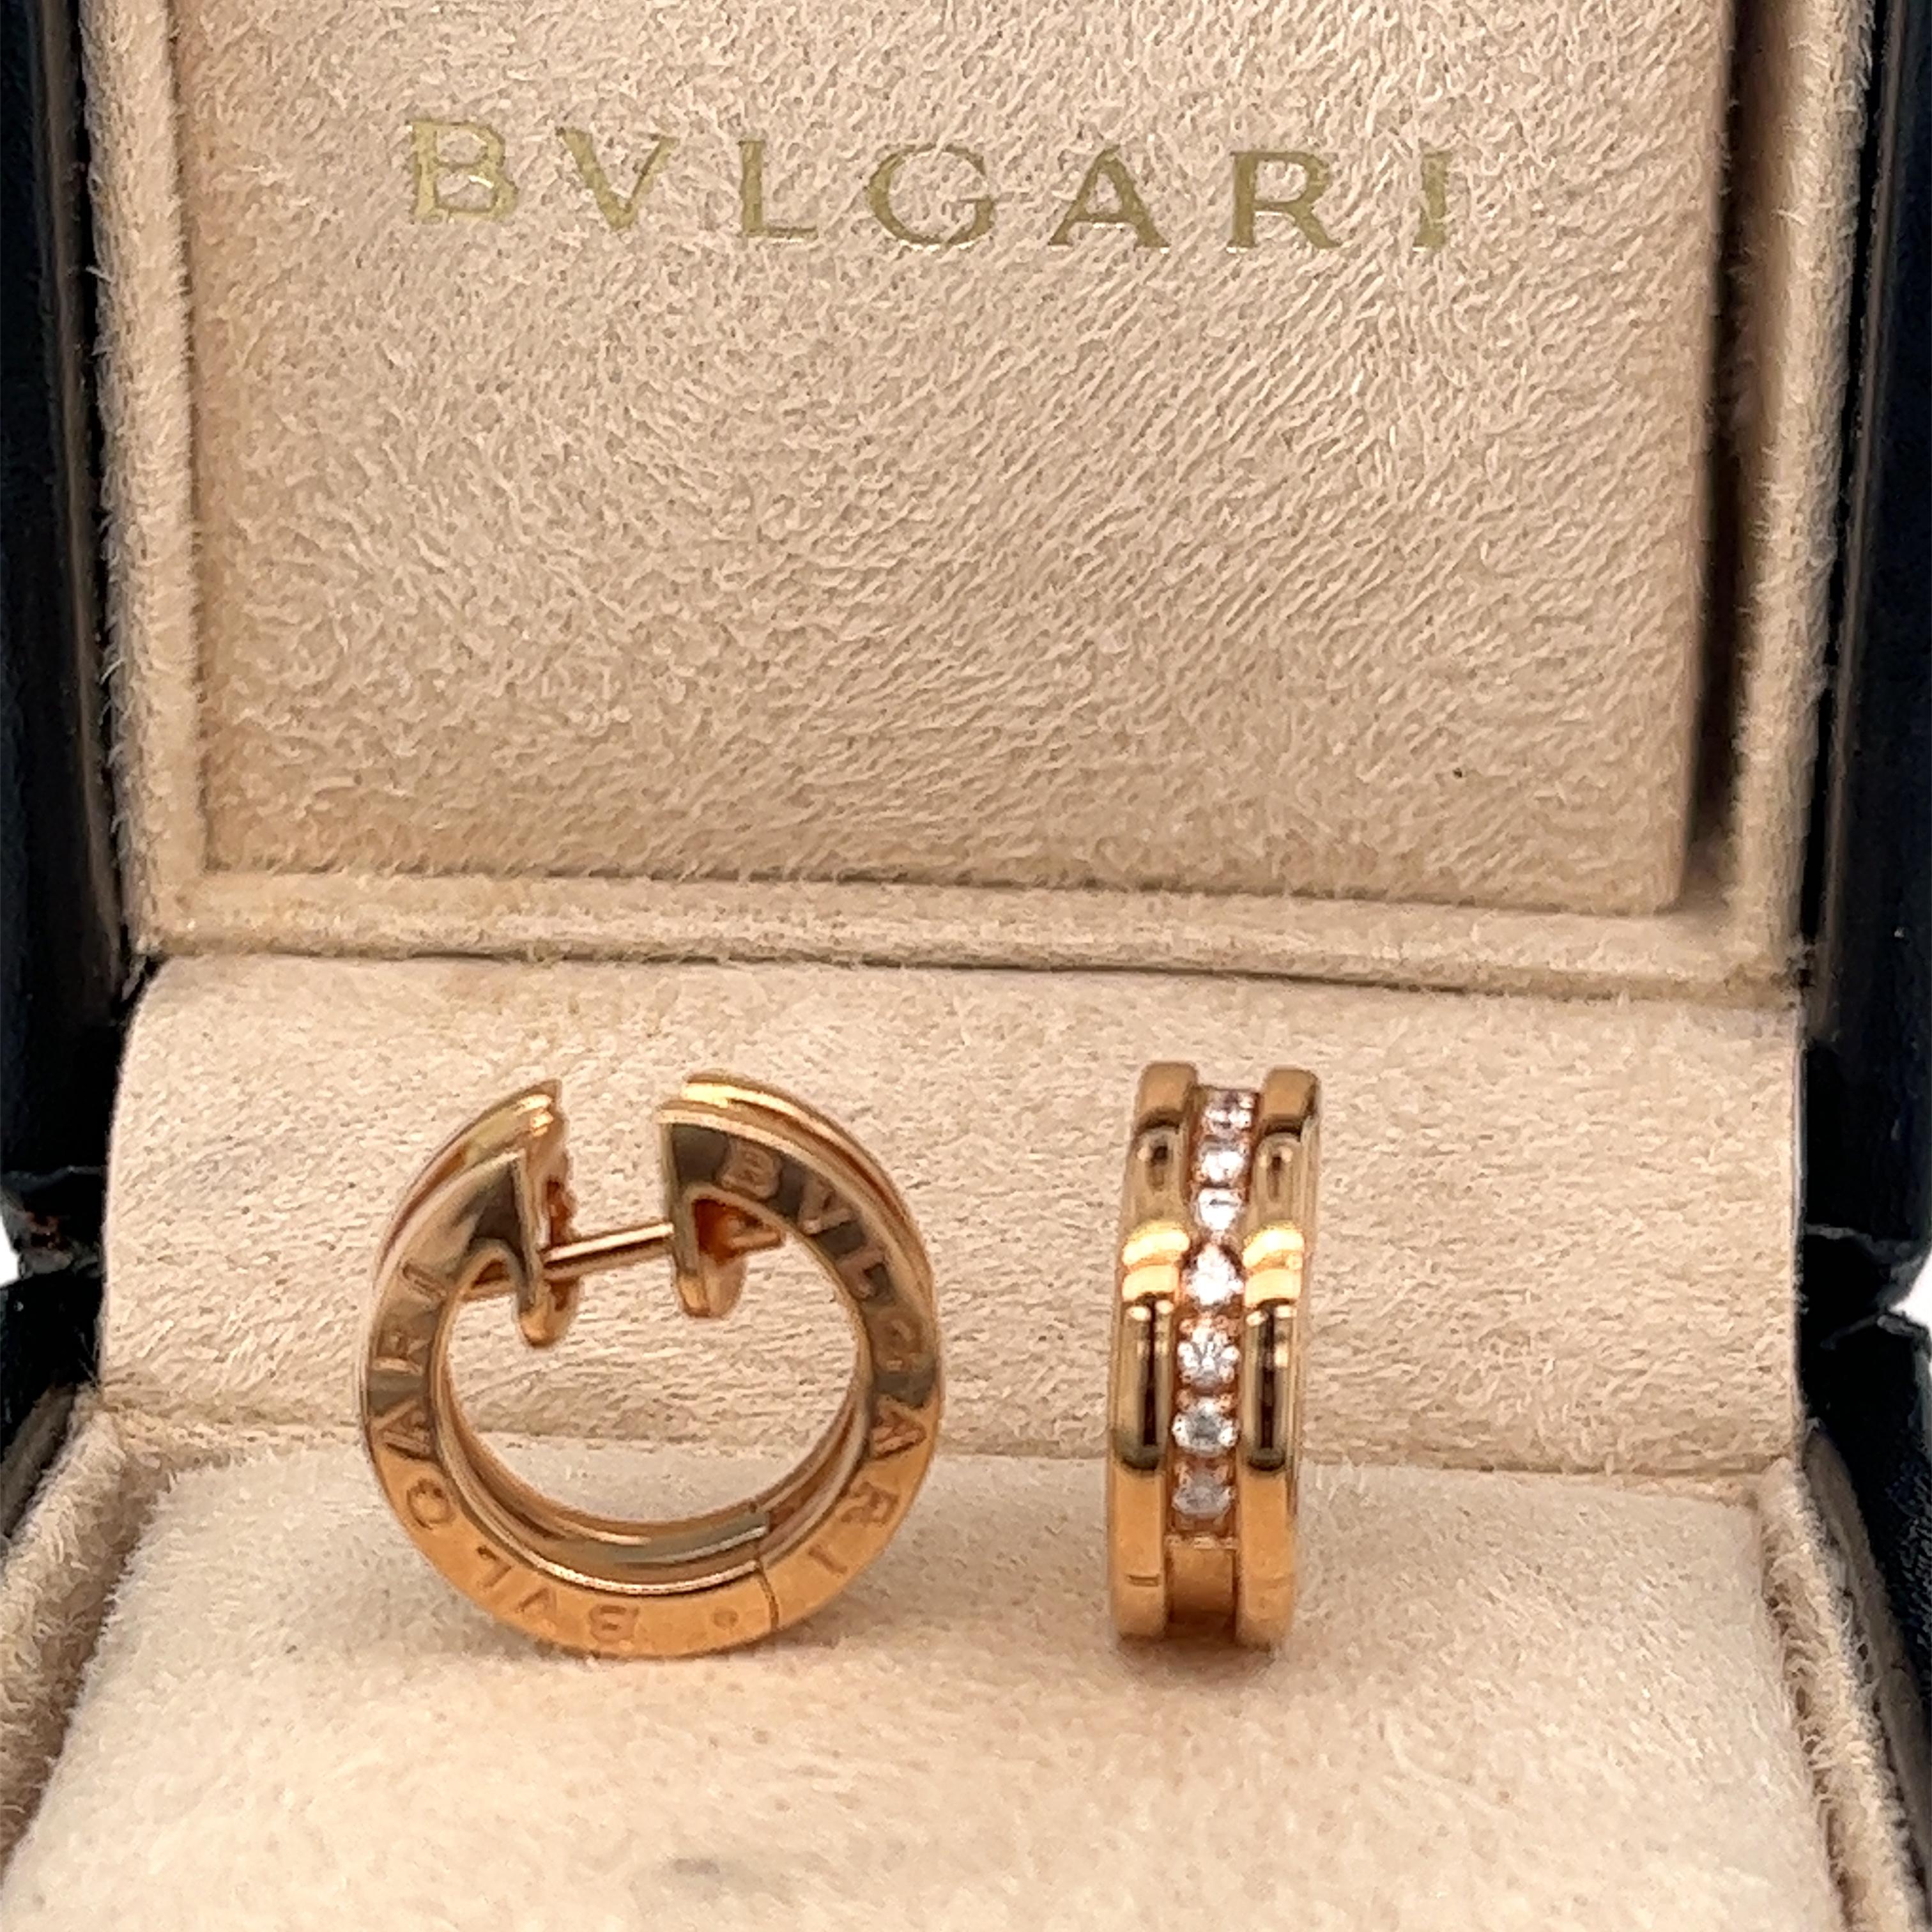 Offered here is a authentic Bulgari 18kt Rose Gold with Diamonds Small B.Zero 1 Hoop Earrings, in great condition with box.